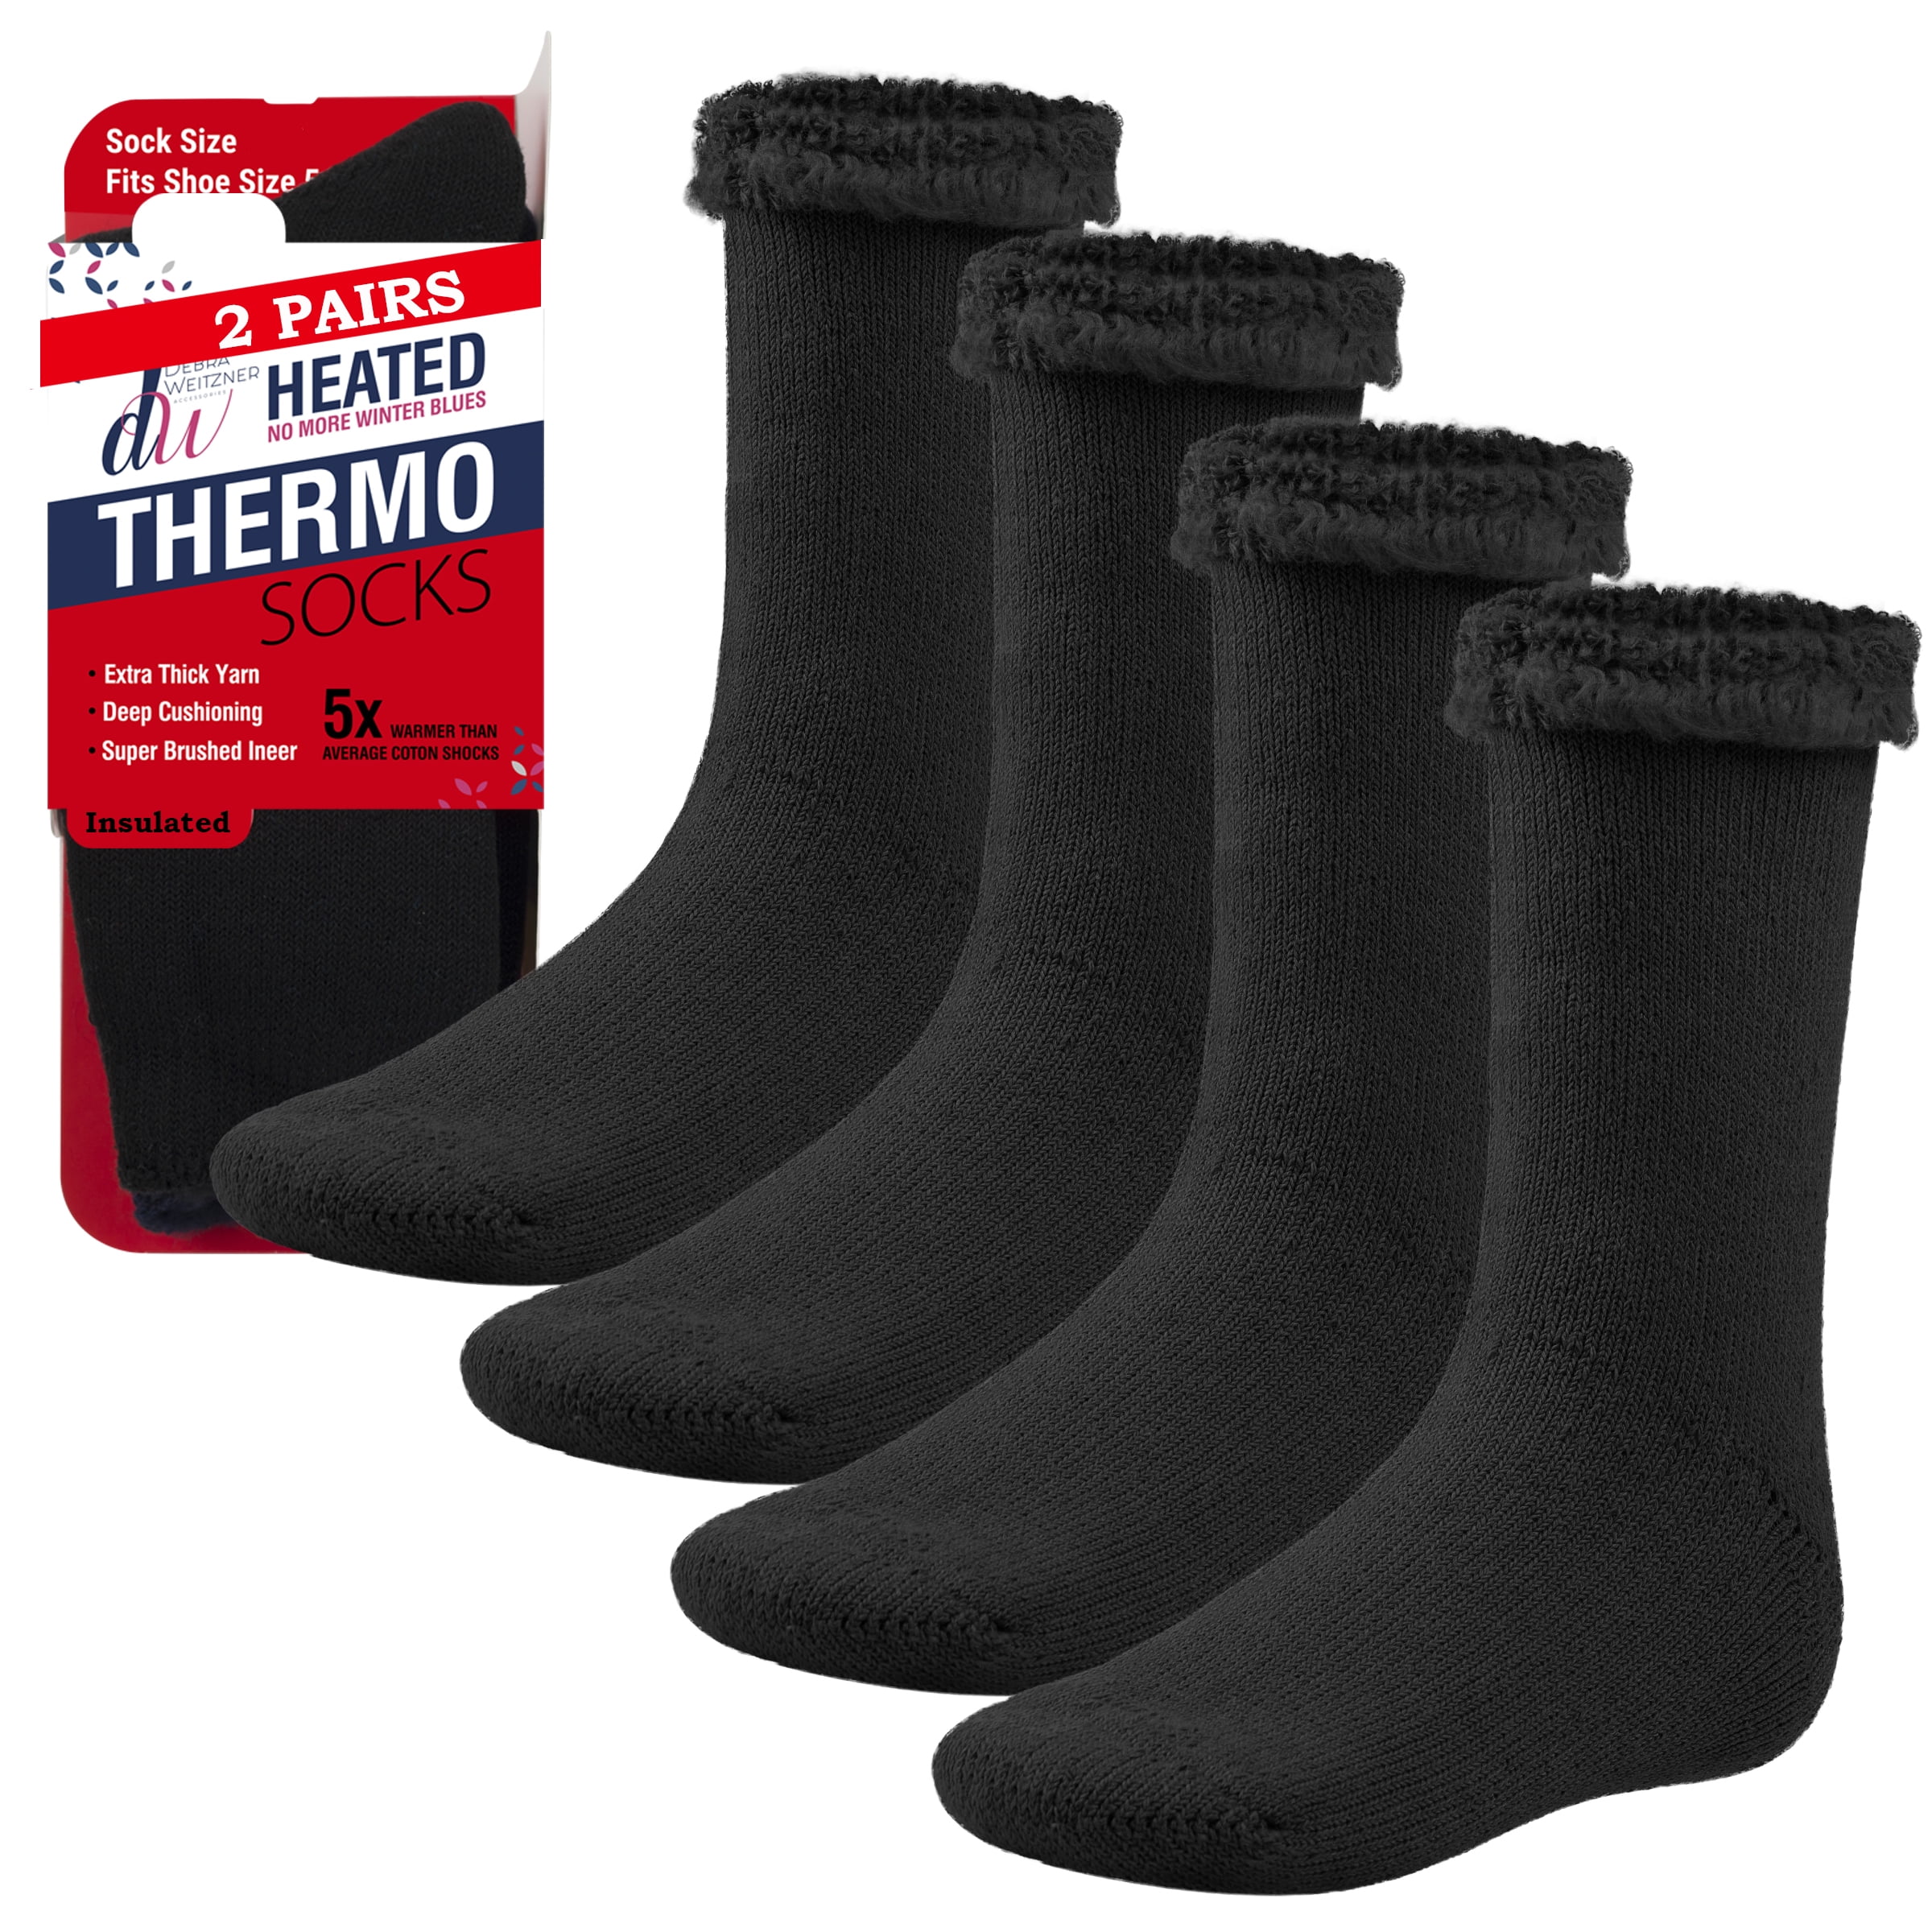 Warm Thermal Socks for Men and Women Extreme Cold Weather Winter Wear  Insulated Heavy Boot Socks for Hunting Skiing Snow Etc 2 Pairs 